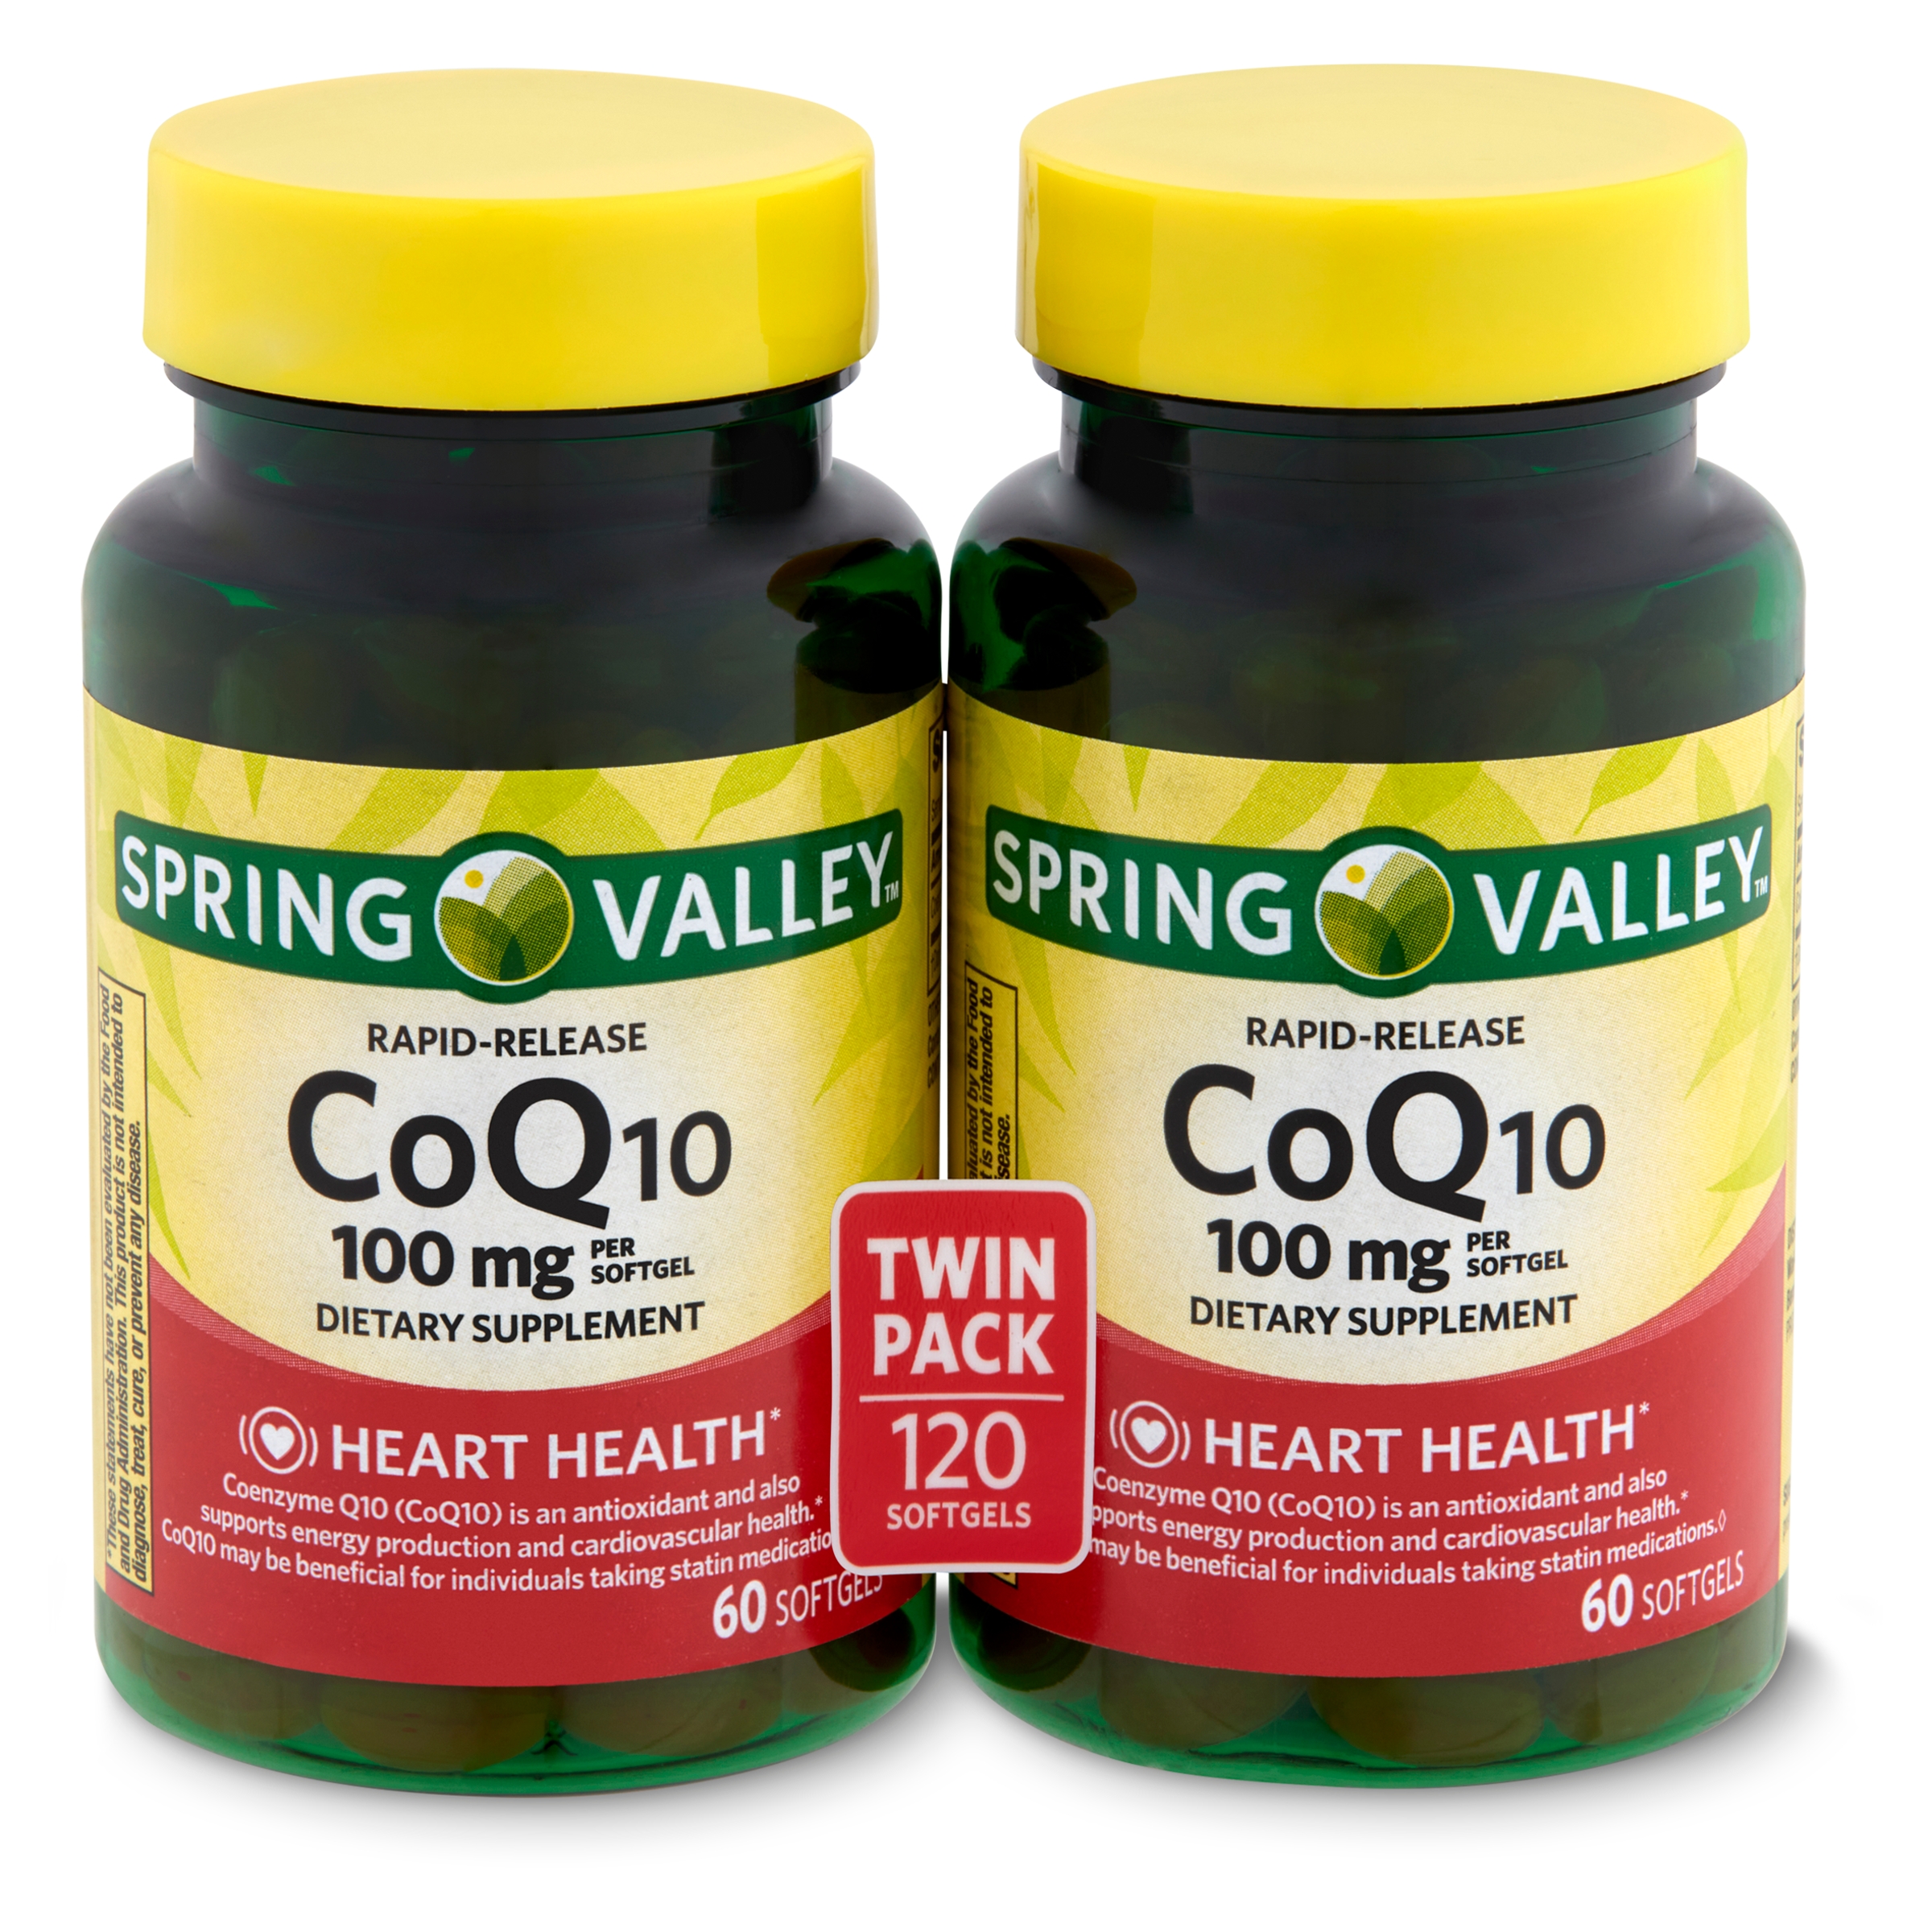 Spring Valley Rapid-Release CoQ10 Dietary Supplement 100mg Softgels, 60 Count, 2 Pack - image 1 of 8